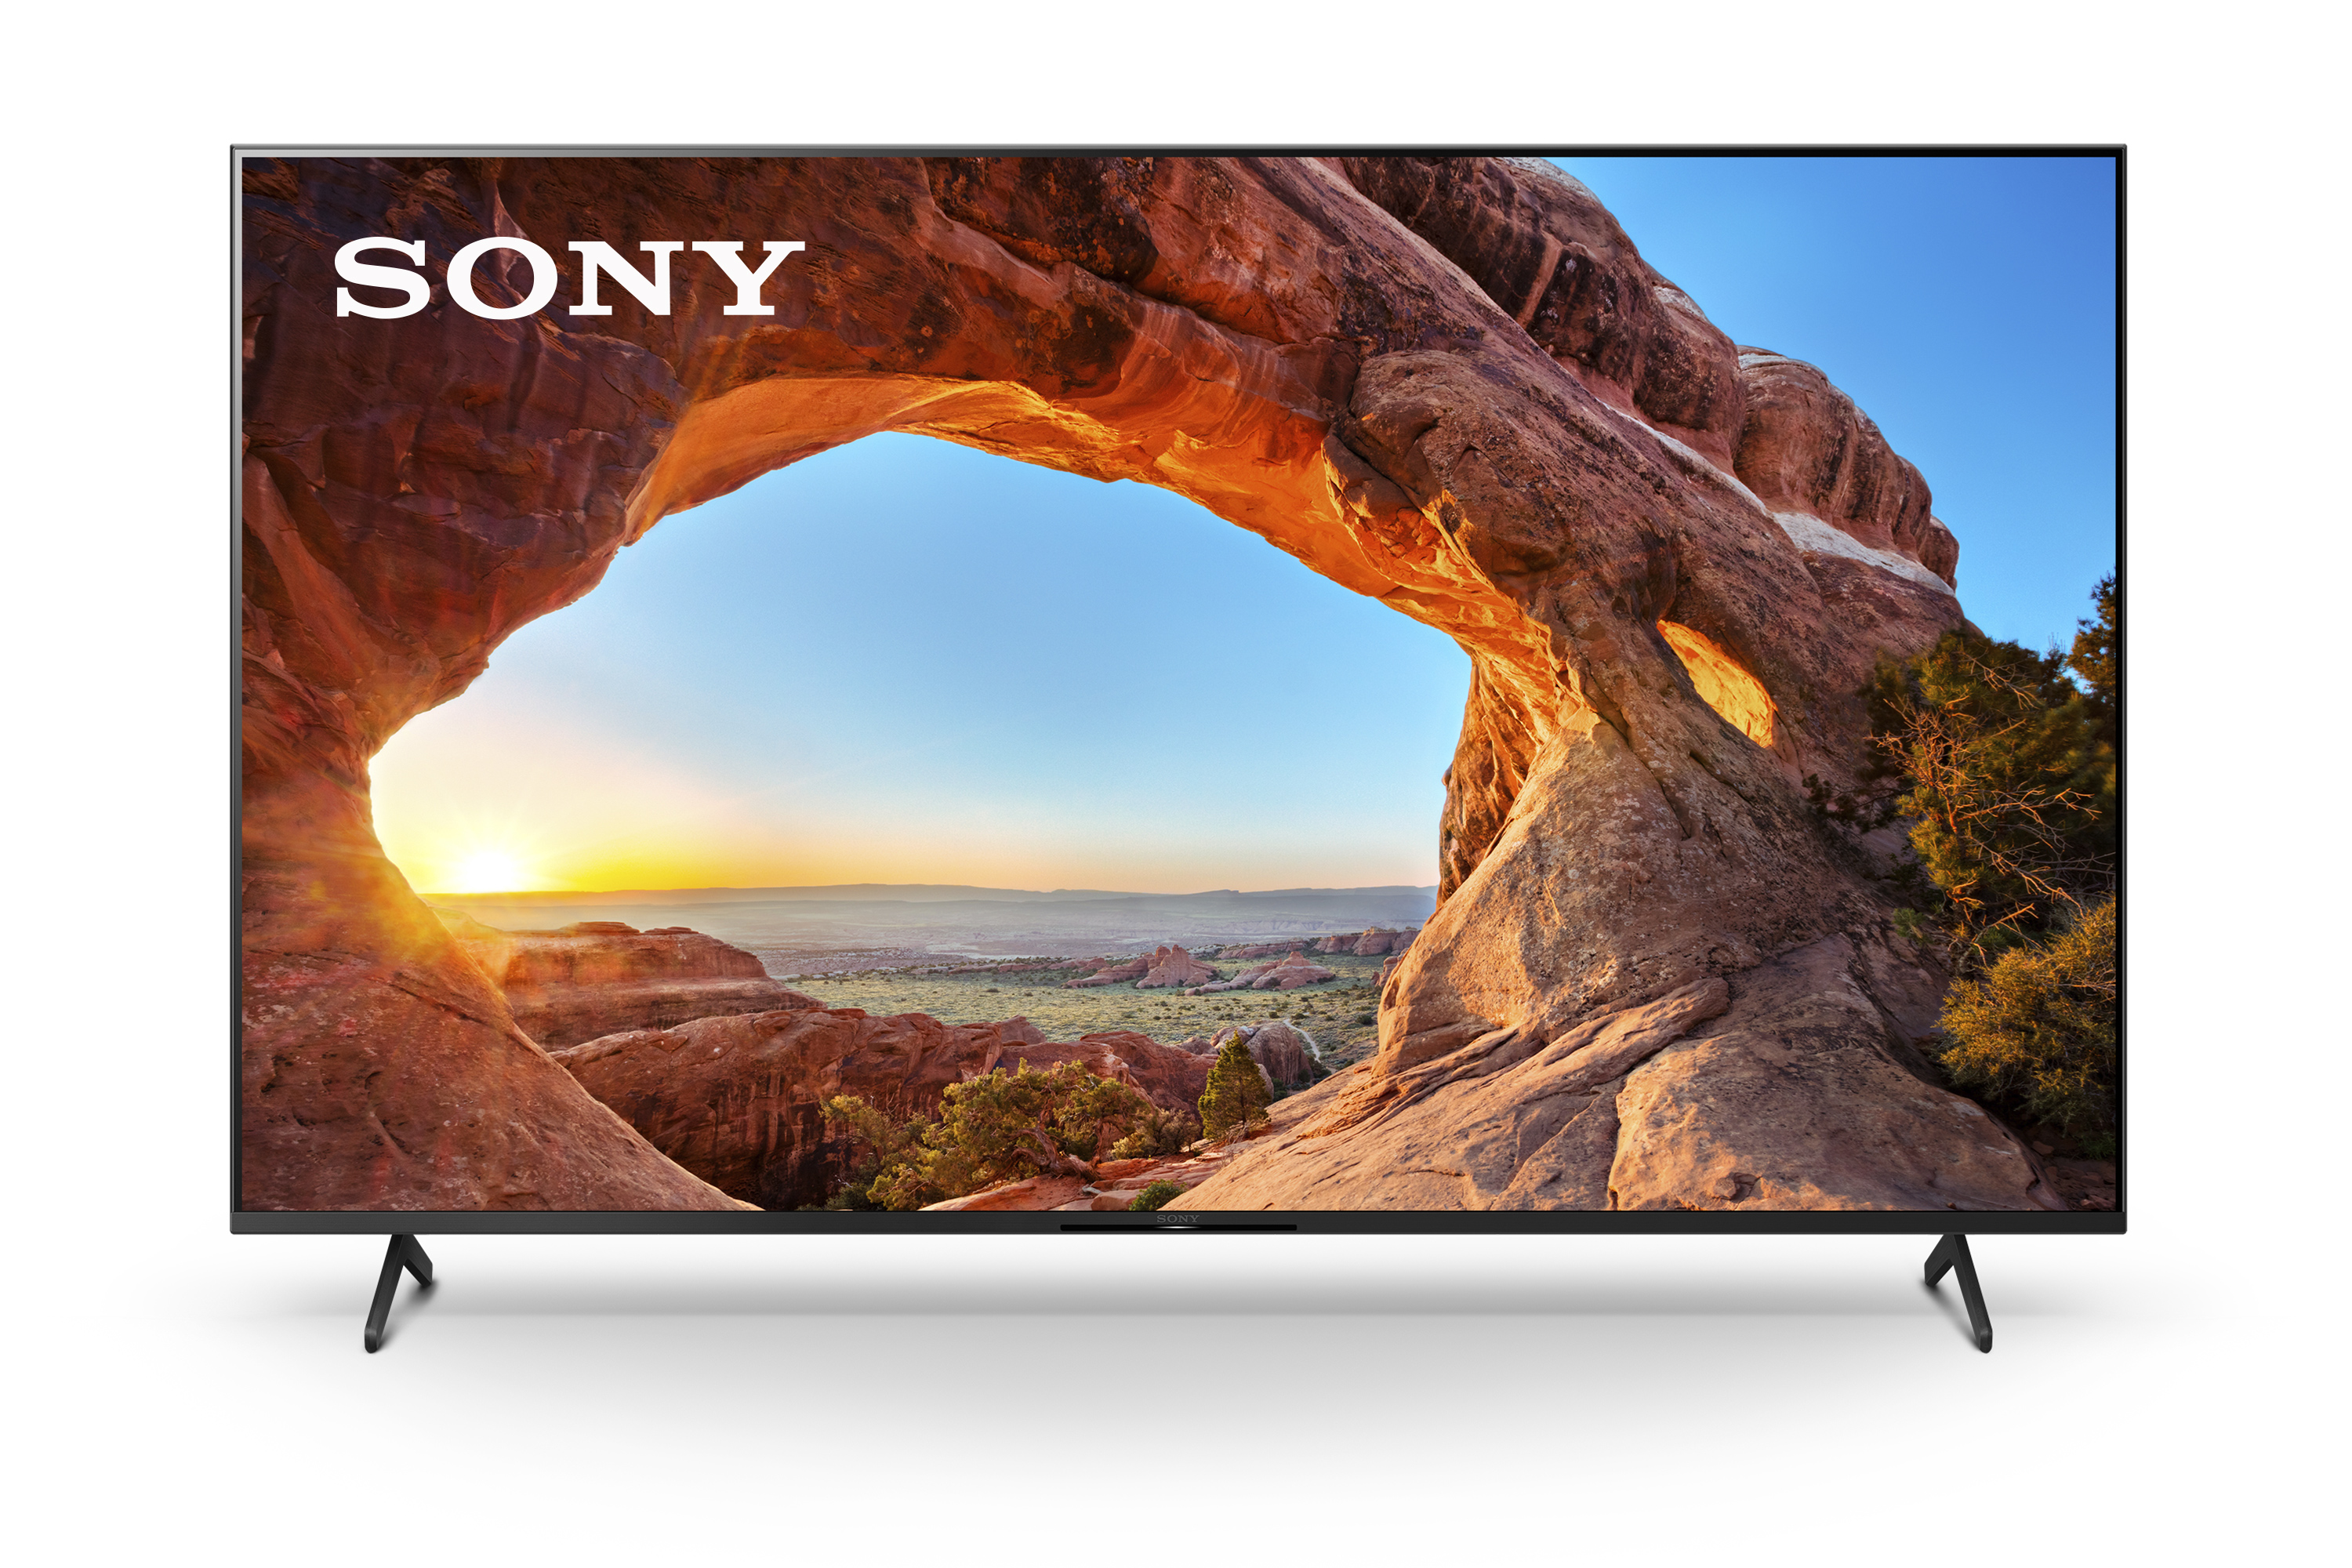 Sony XBR X85 Series 4K ULTRA HD LED TV with X1 4k HDR Proccesor